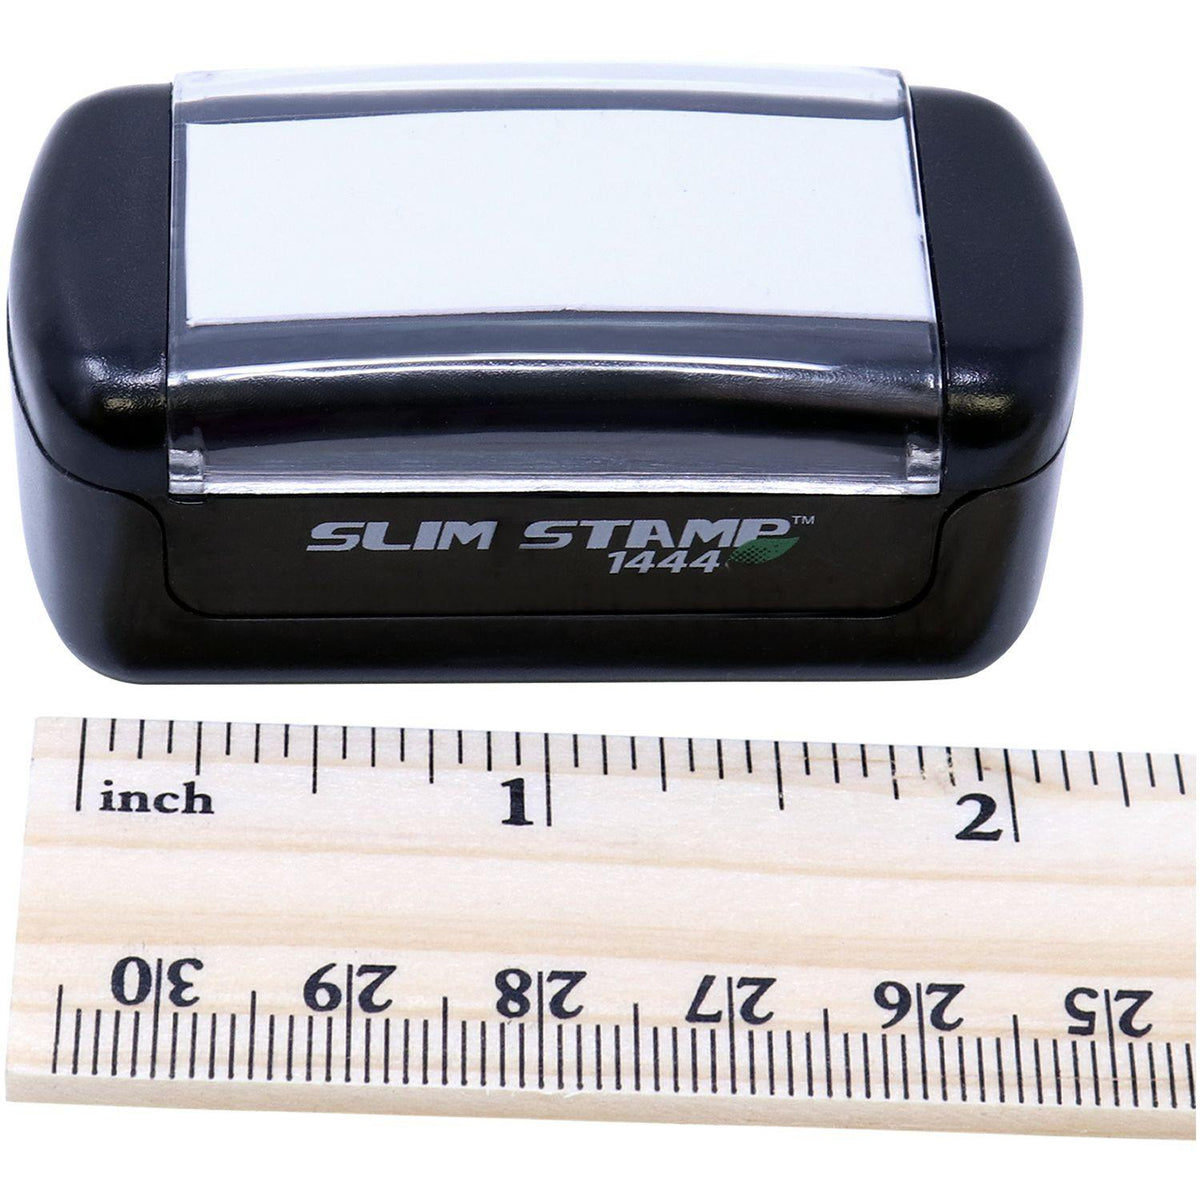 Measurement Slim Pre-Inked Covid-19 Stamp with Ruler